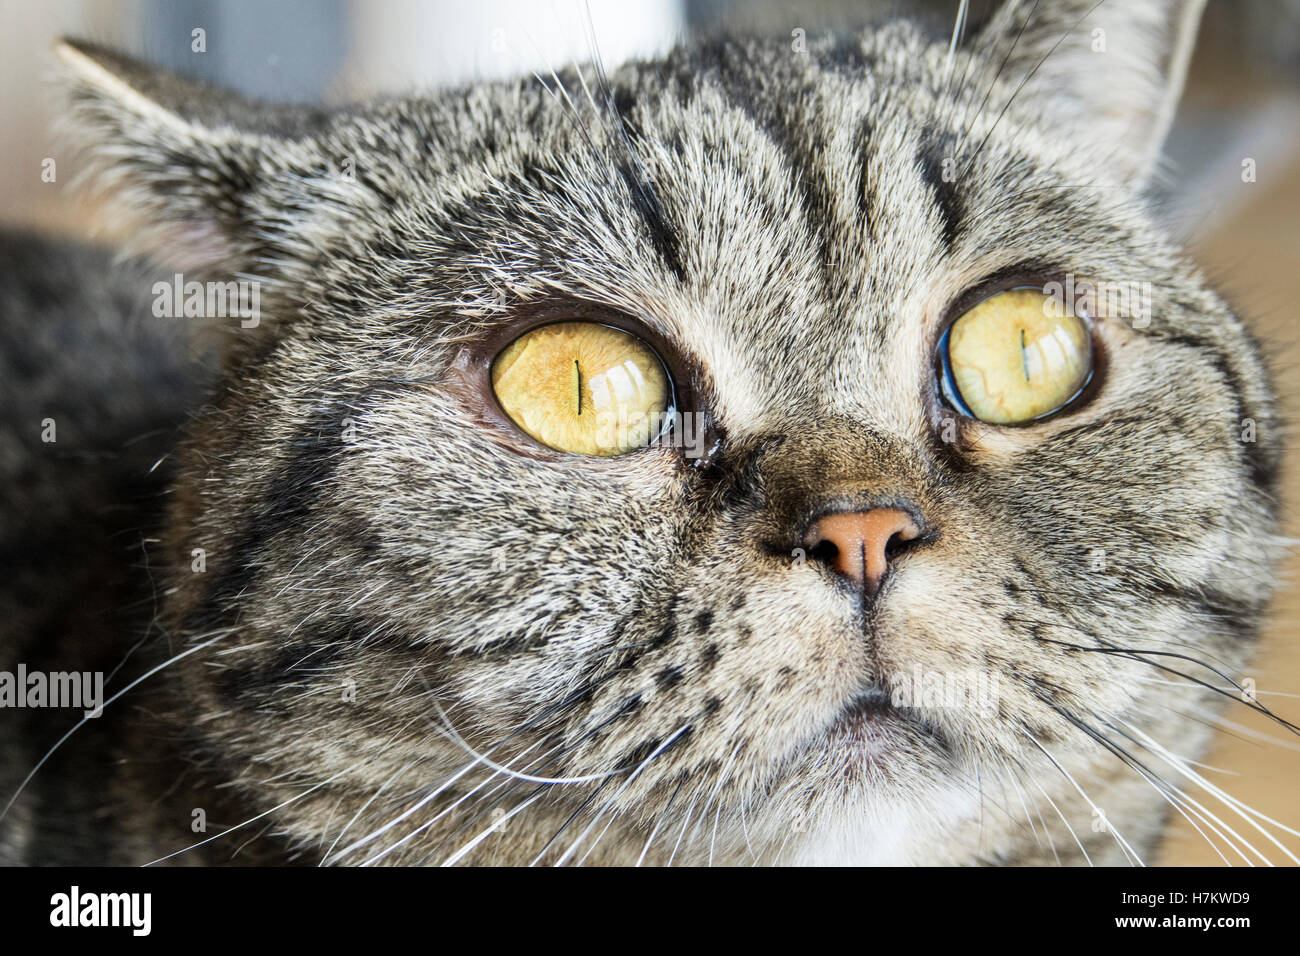 British shorthair cat looking away with curiosity. Close up of head and eyes. Stock Photo